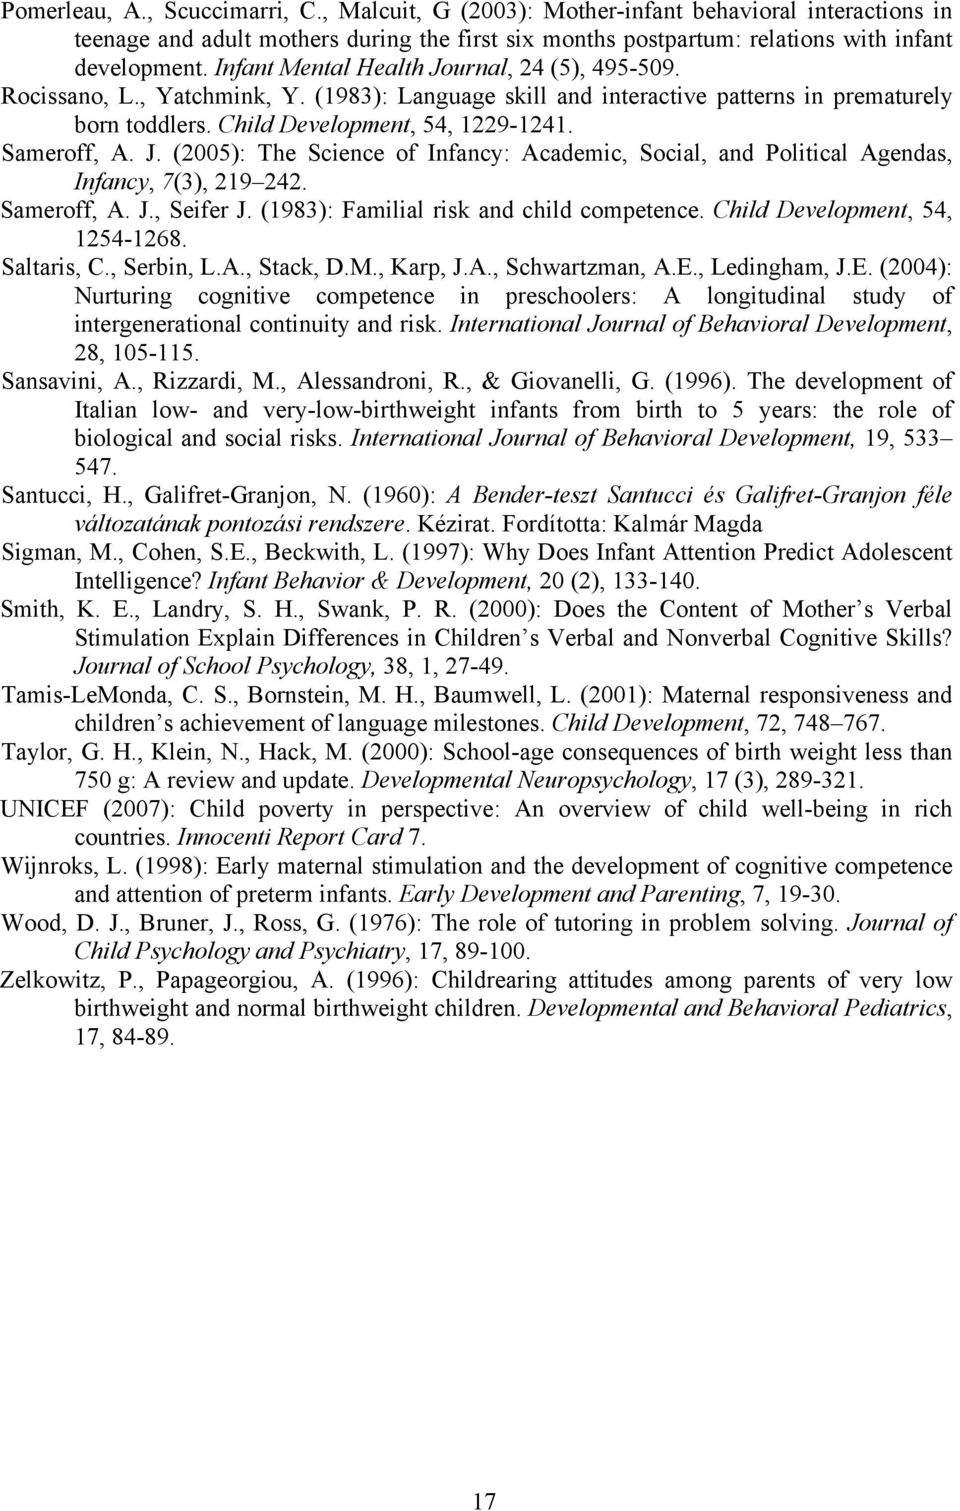 J. (2005): The Science of Infancy: Academic, Social, and Political Agendas, Infancy, 7(3), 219 242. Sameroff, A. J., Seifer J. (1983): Familial risk and child competence.